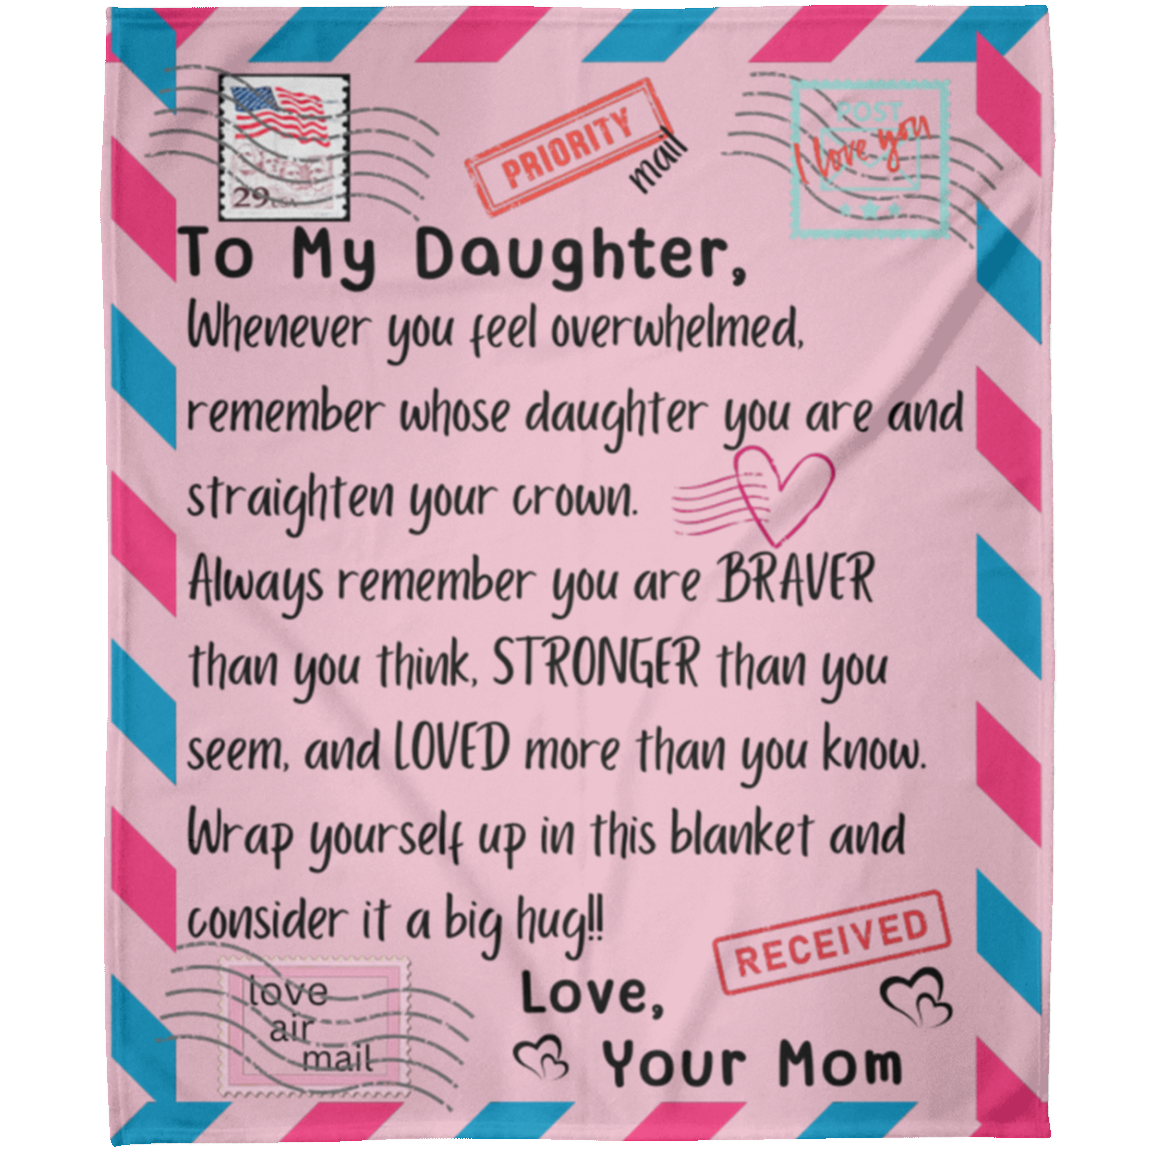 To My DaughterMom - Loved - Fleece Blanket 50x60